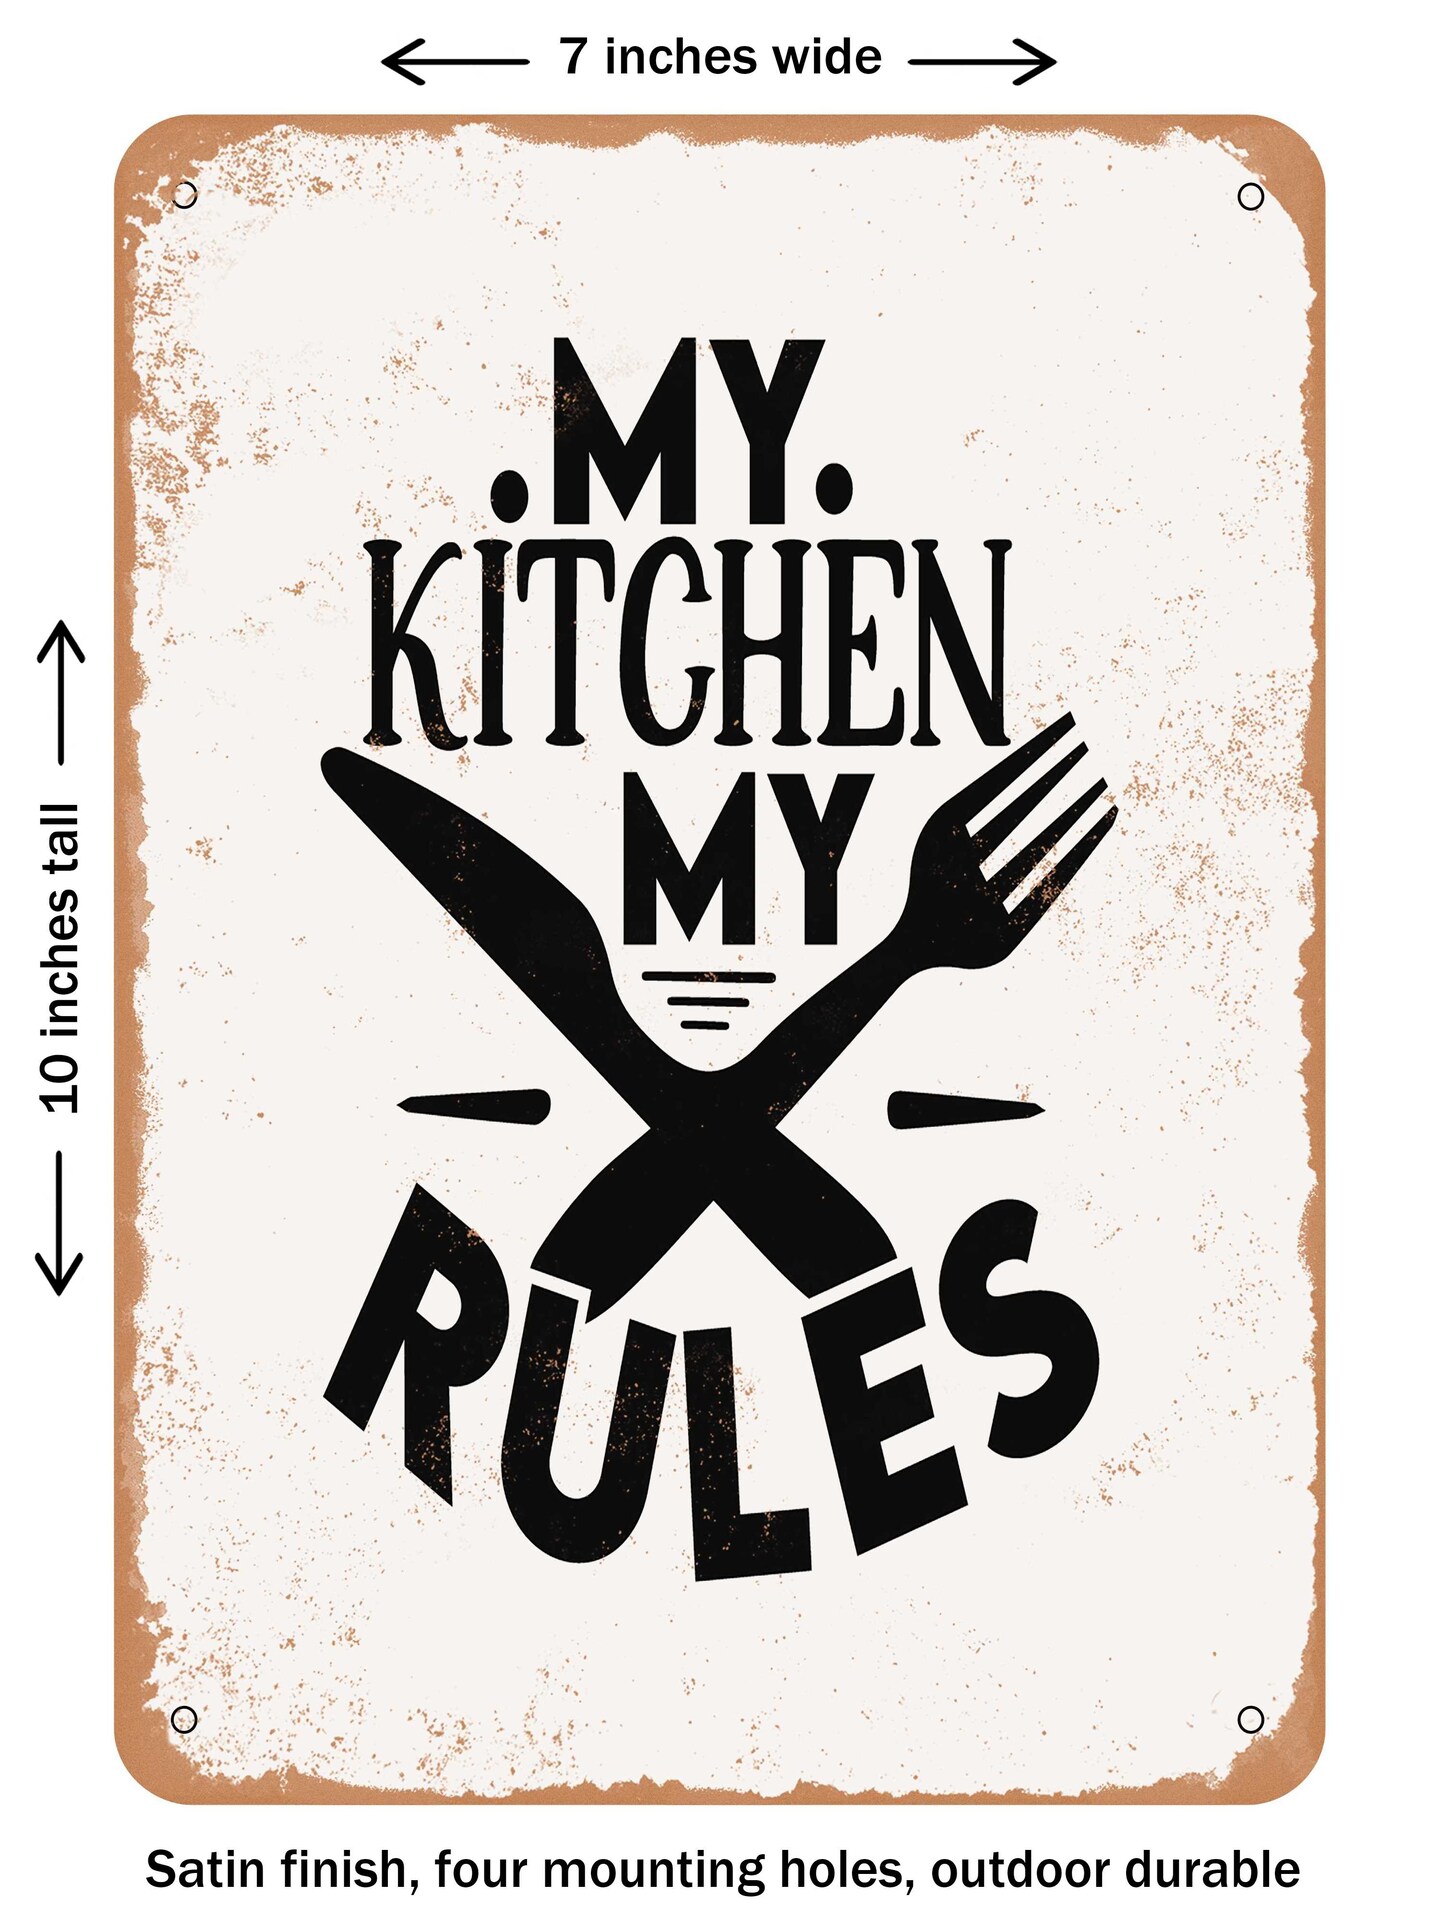 DECORATIVE METAL SIGN - My Kitchen My Rules  - Vintage Rusty Look